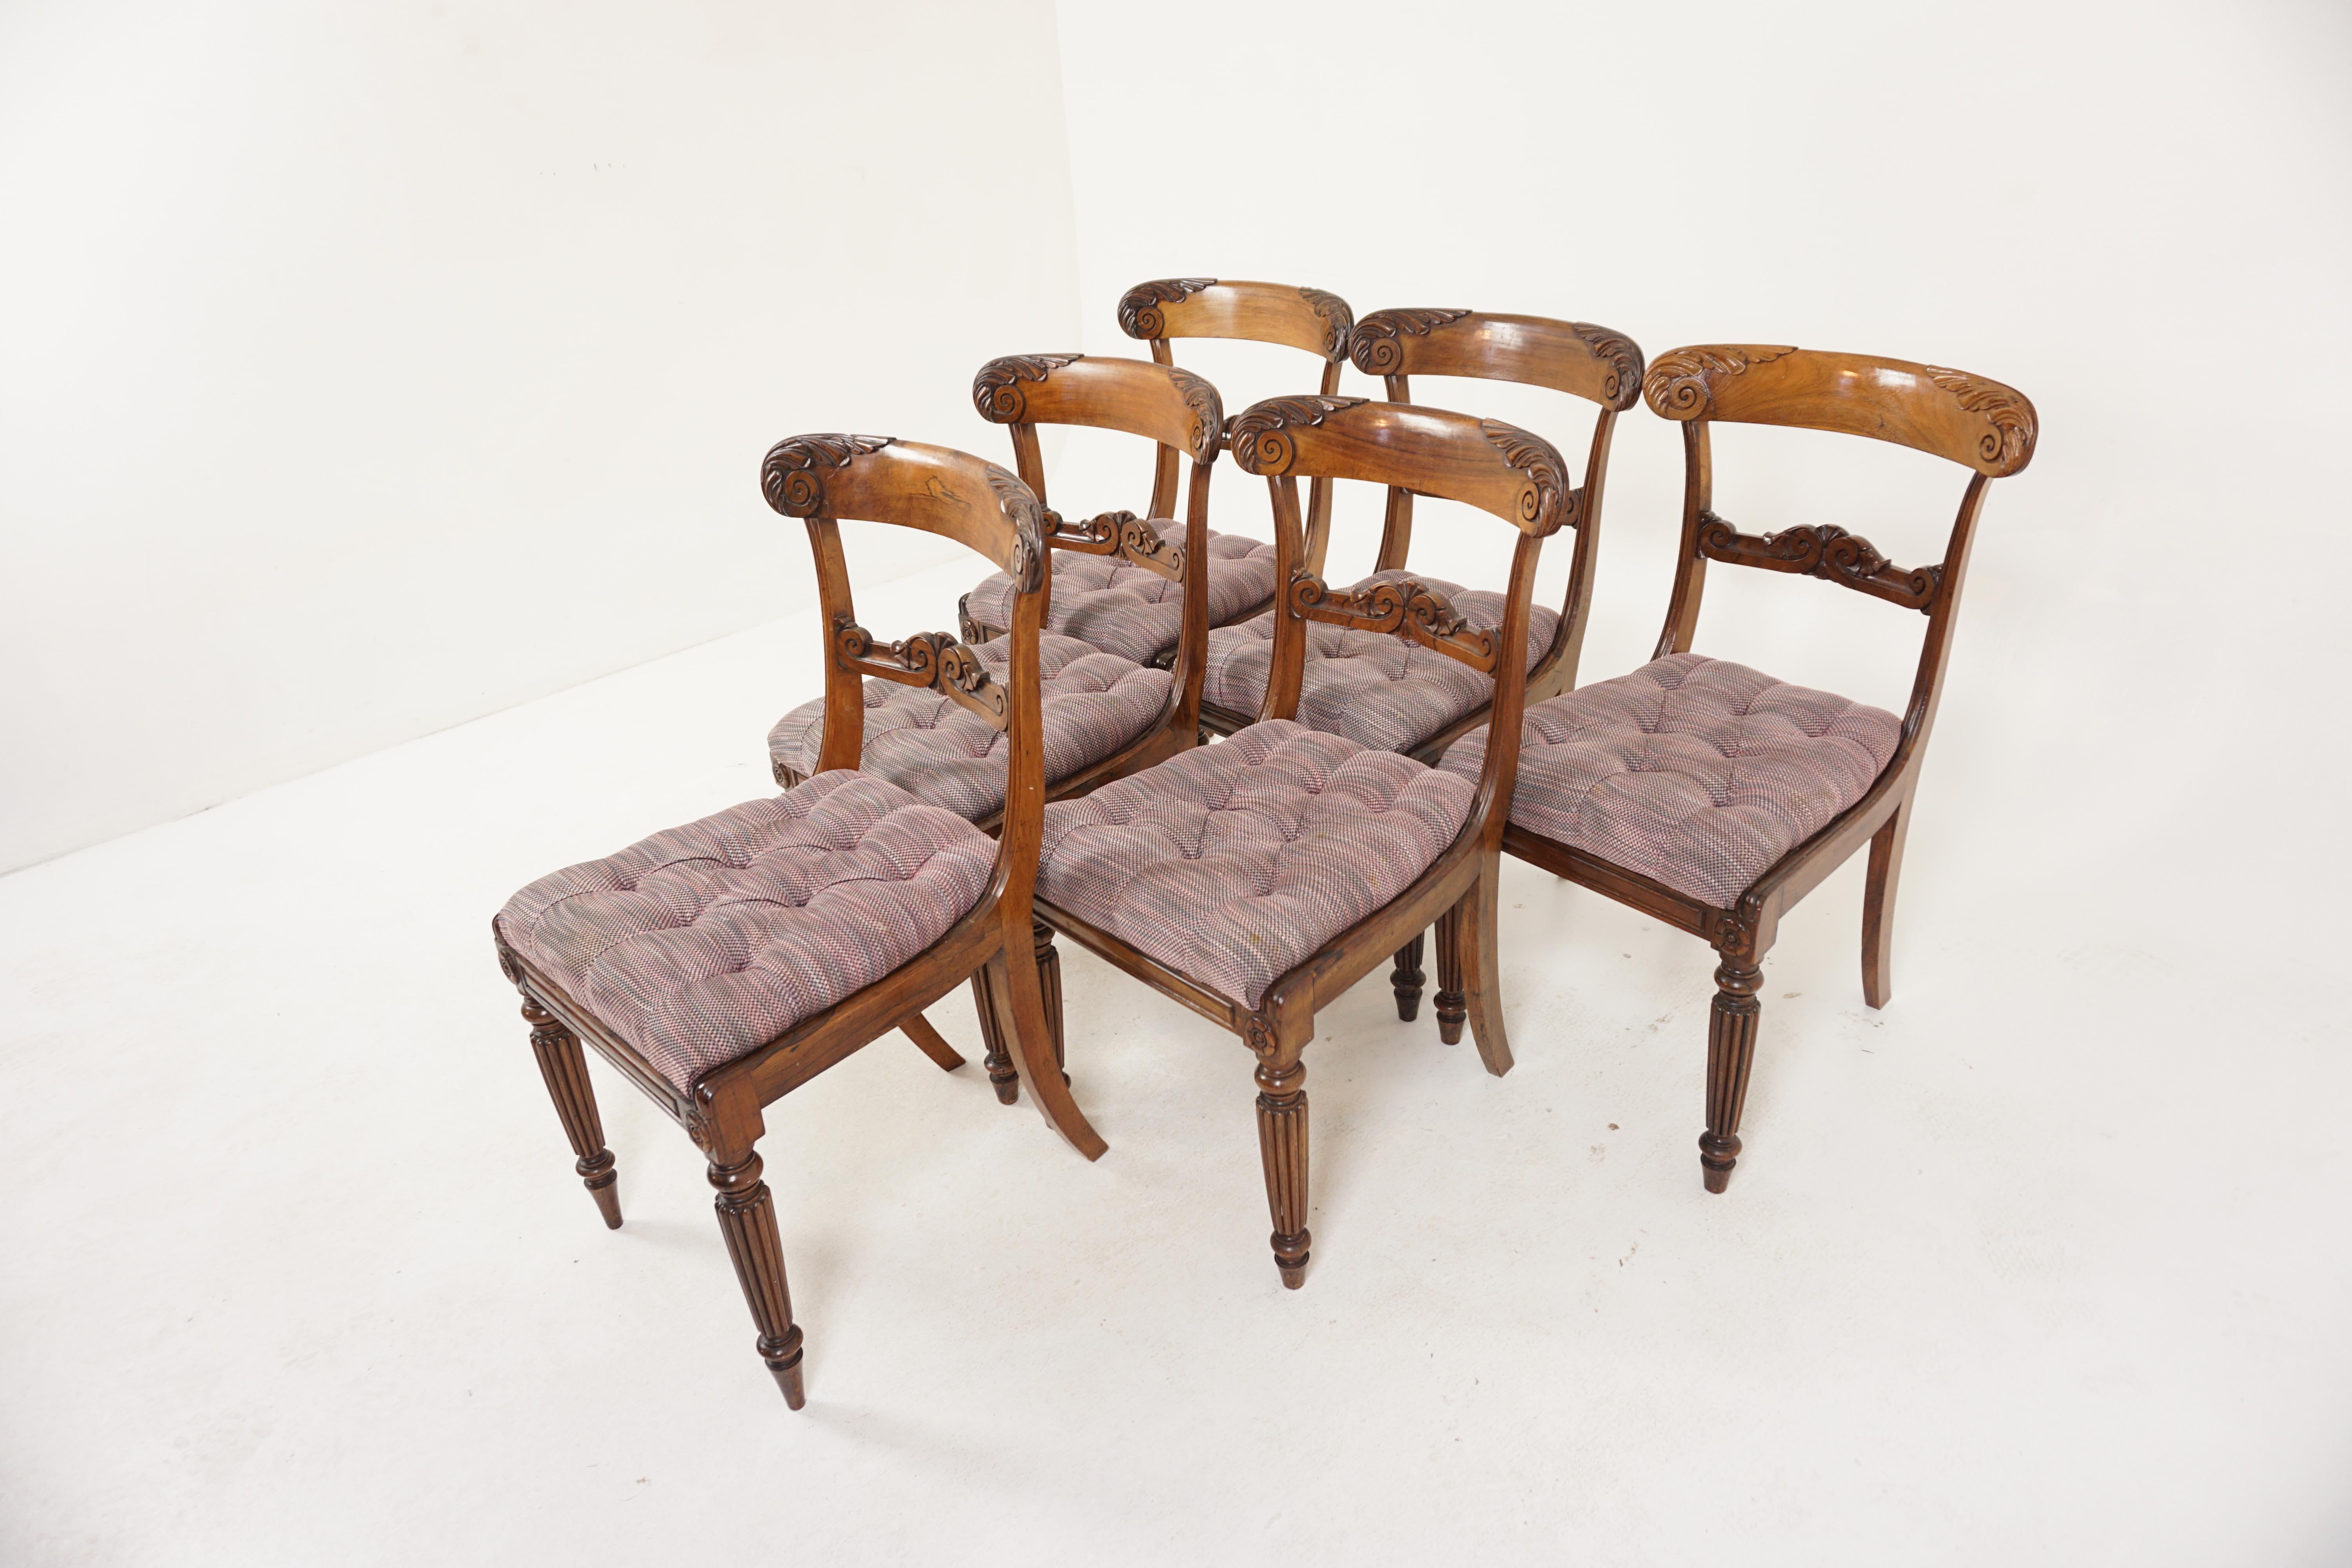 Set of 6 Regency Wood dining chairs lift-up seats, Scotland 1830, H594

Scotland 1830
Solid Wood
Original finish
Shaped carved top rail
With finely carved mid rail
Fully upholstered lift up seat
Shaped carved apron on the front
Standing on slender